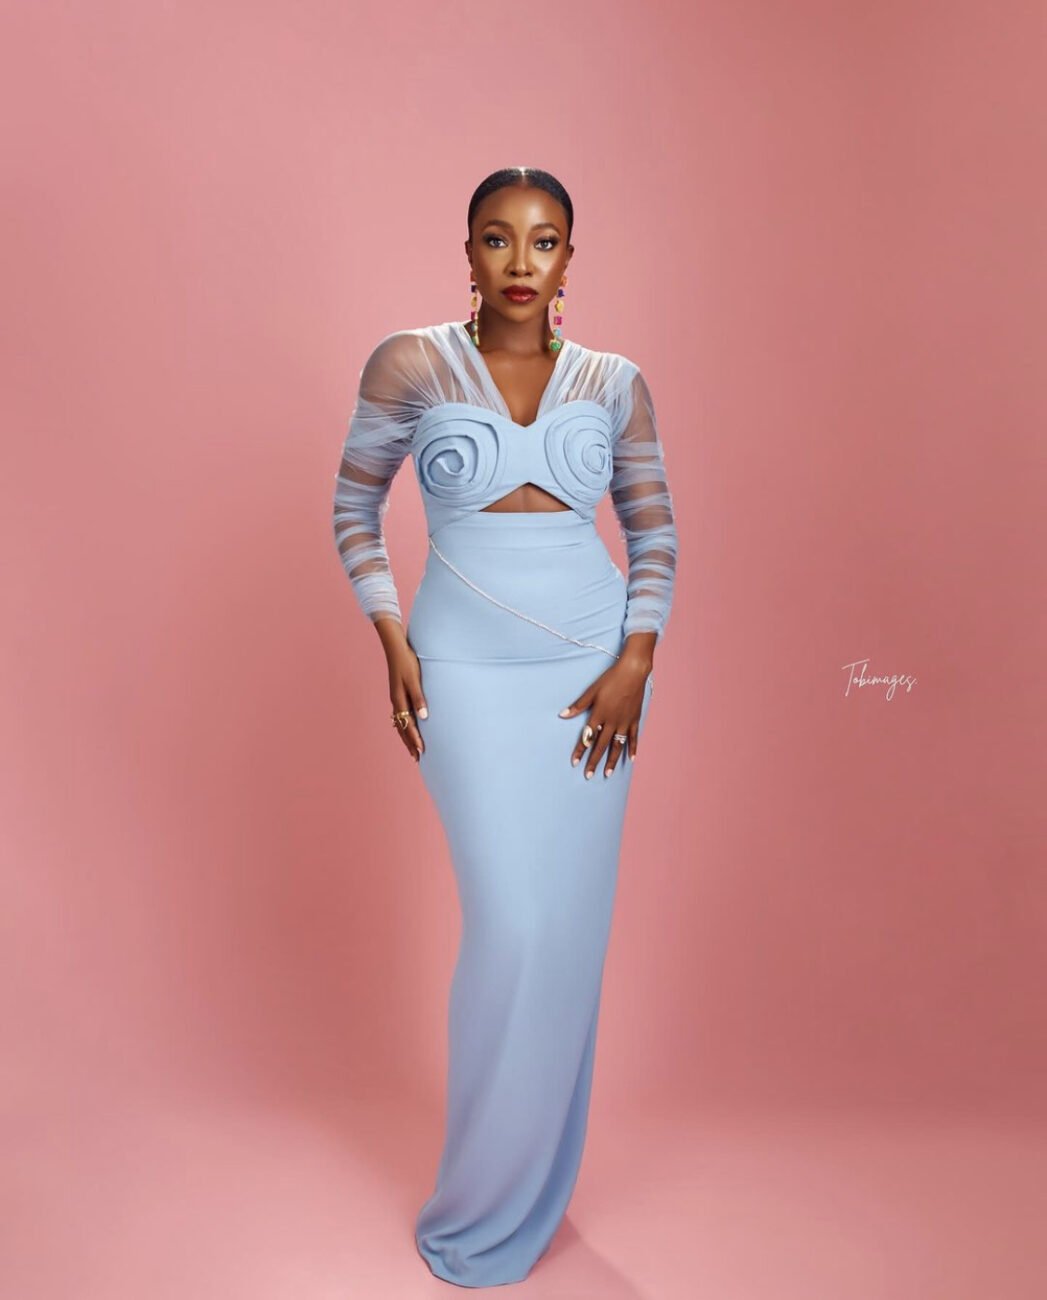 Ini Dima-Okojie in a lovely blue dress with mesh sleeves.